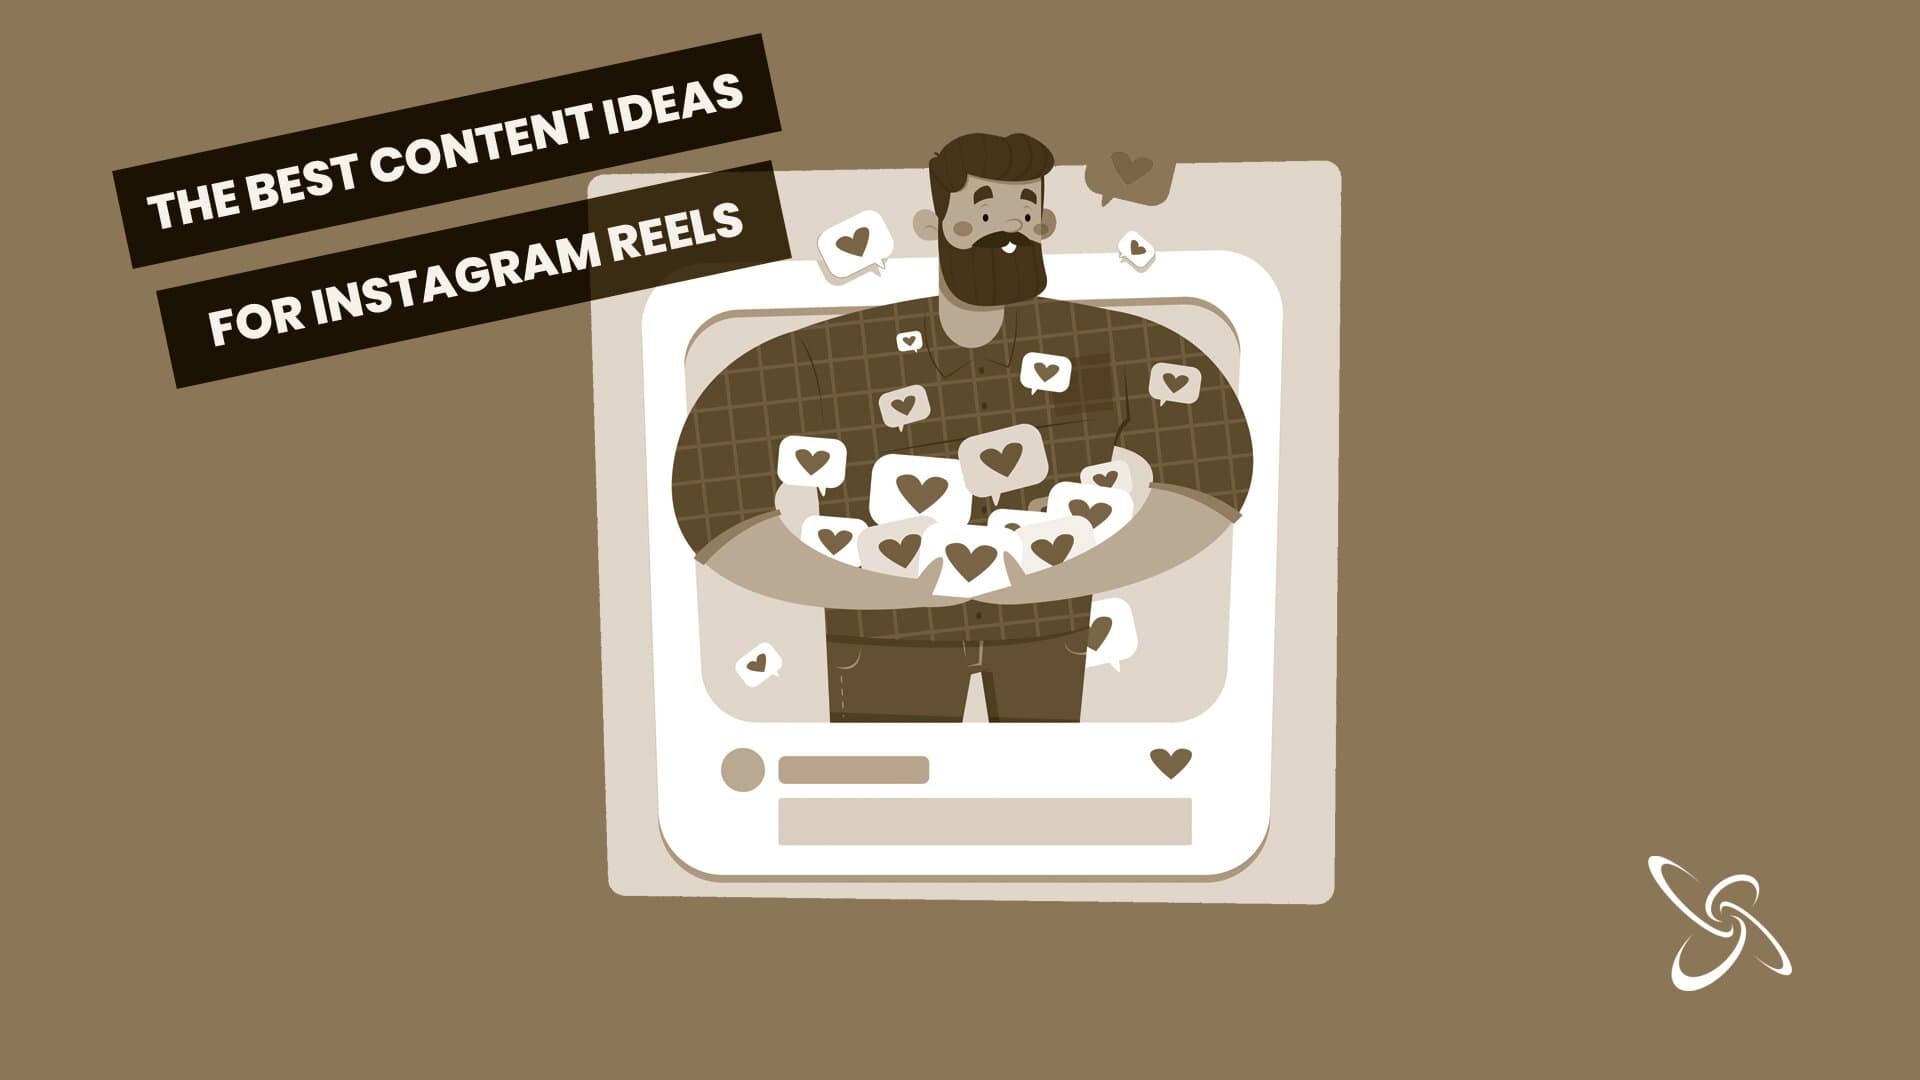 the best content ideas for instagram reels